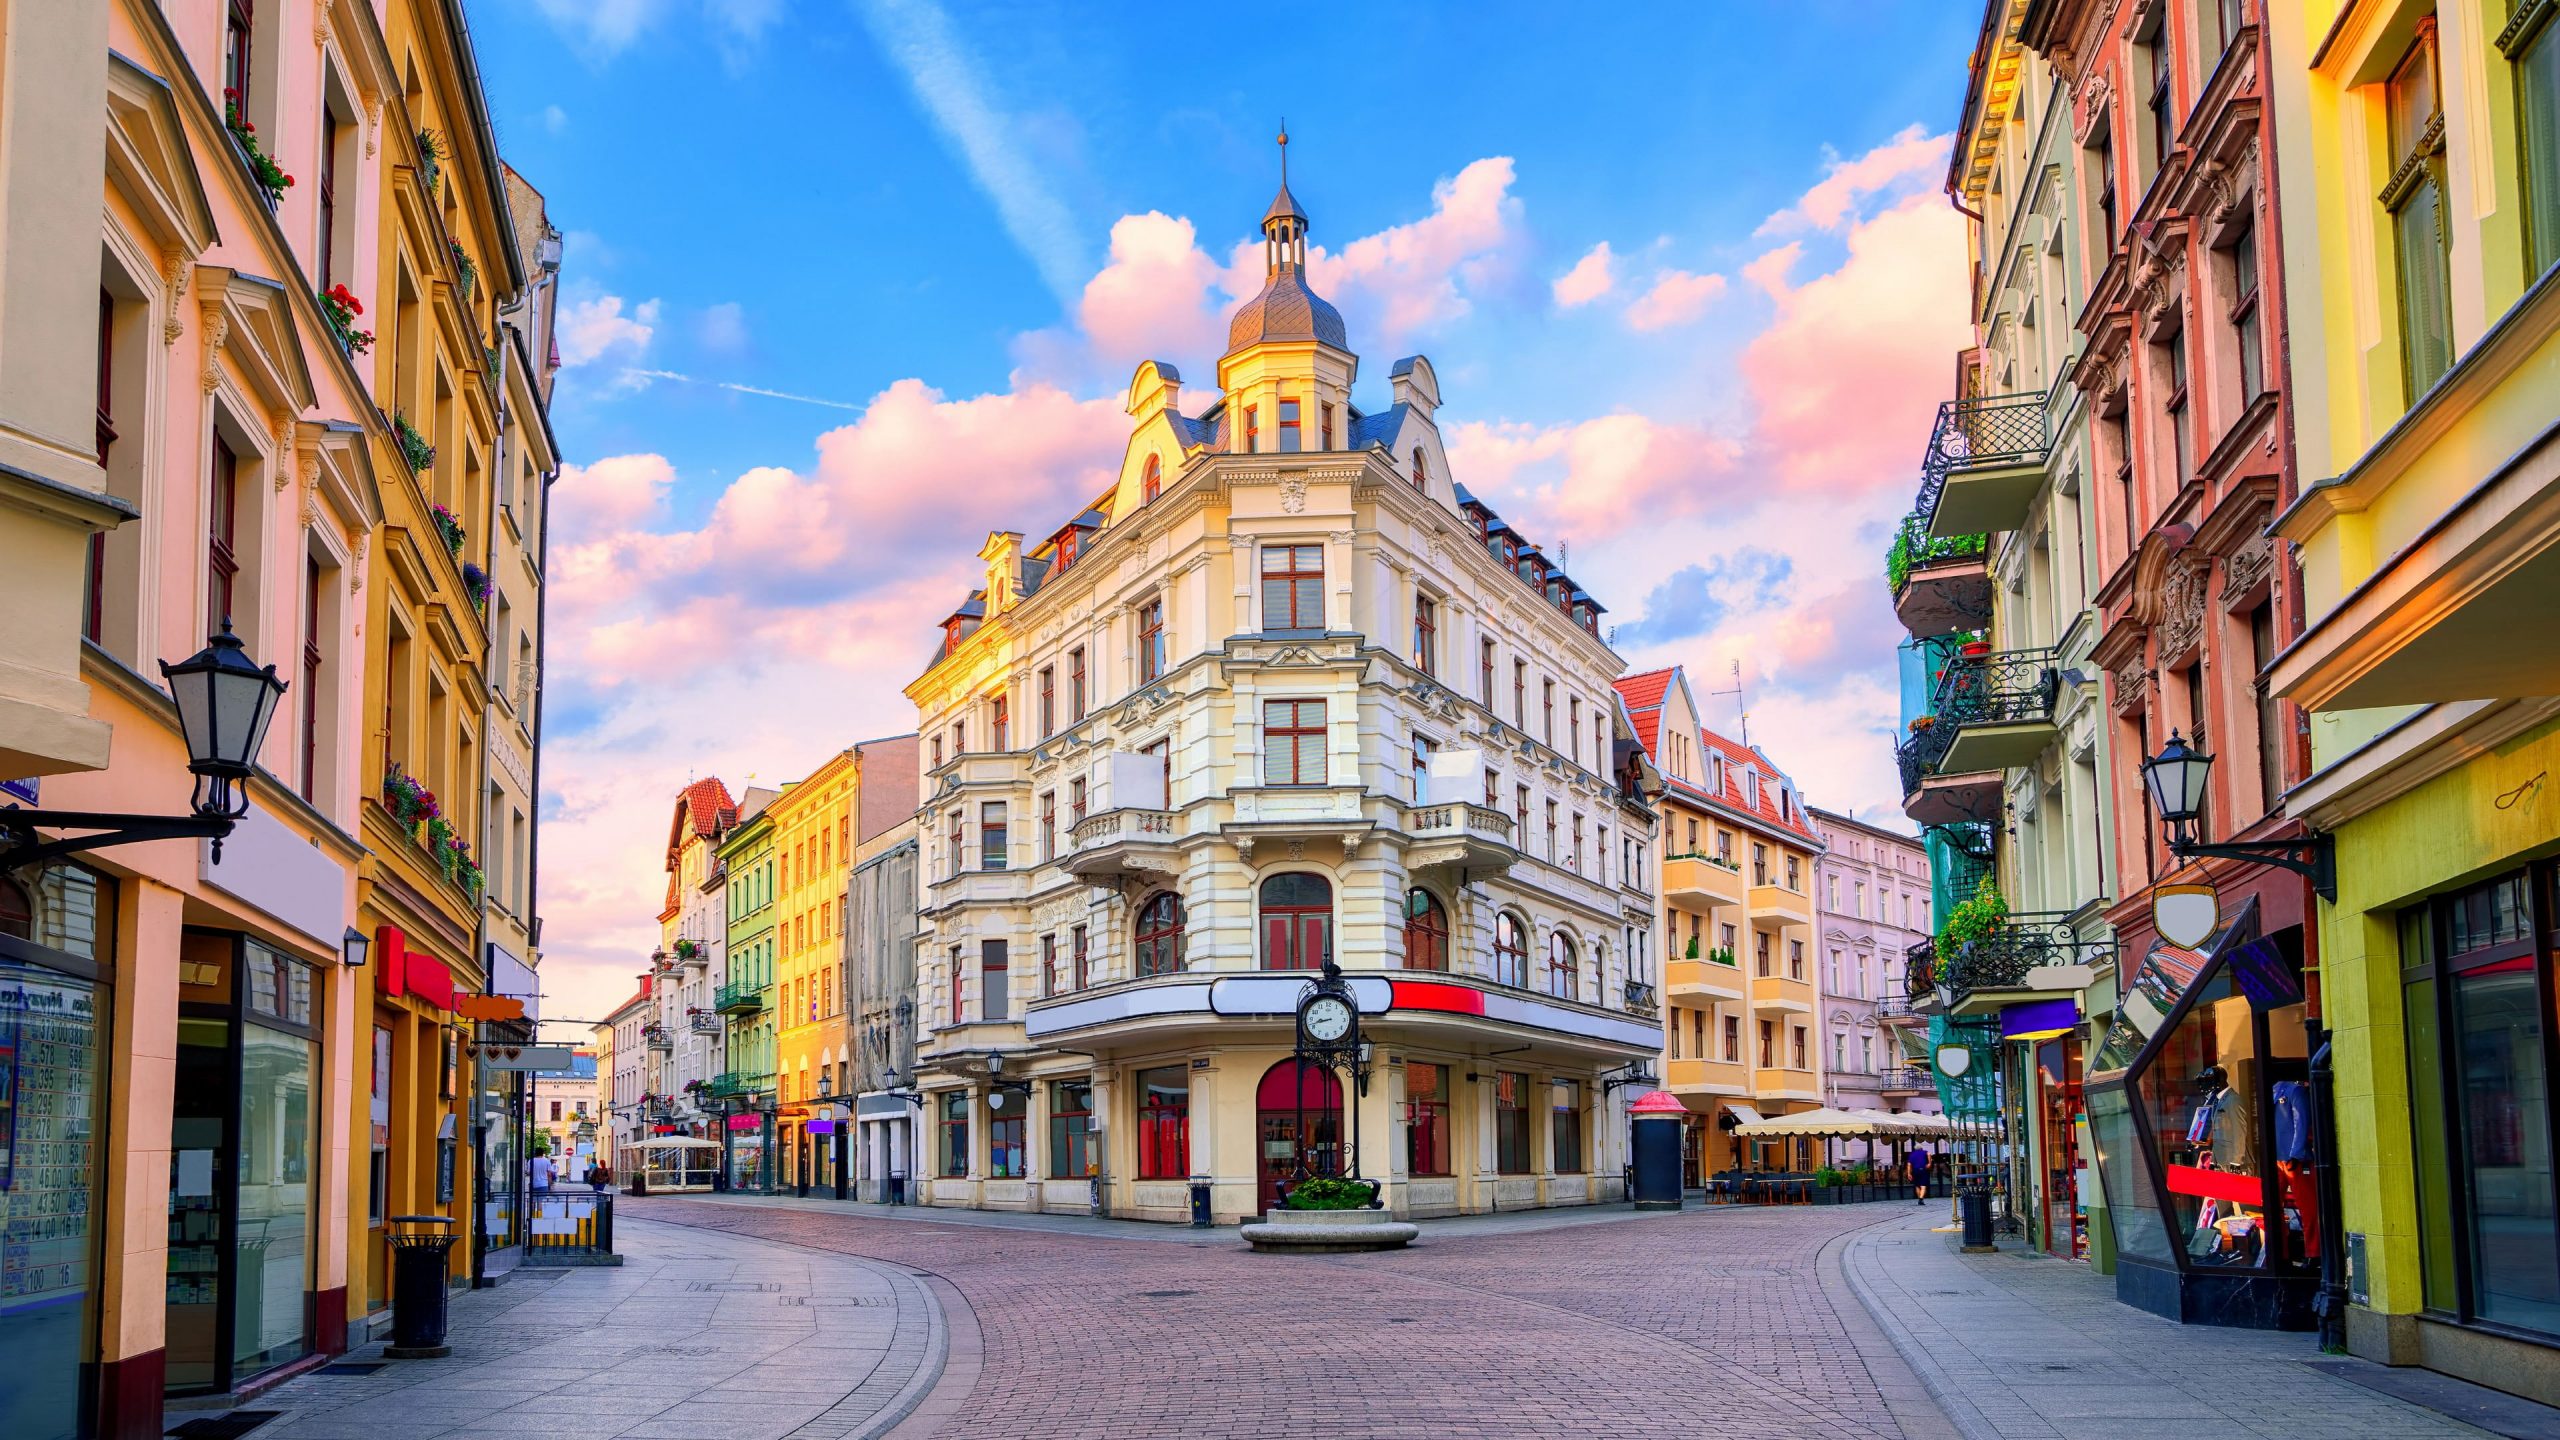 Old Town Wallpaper, Square, Europe, Daytime, Town Square, Poland, Downtown • Wallpaper For You